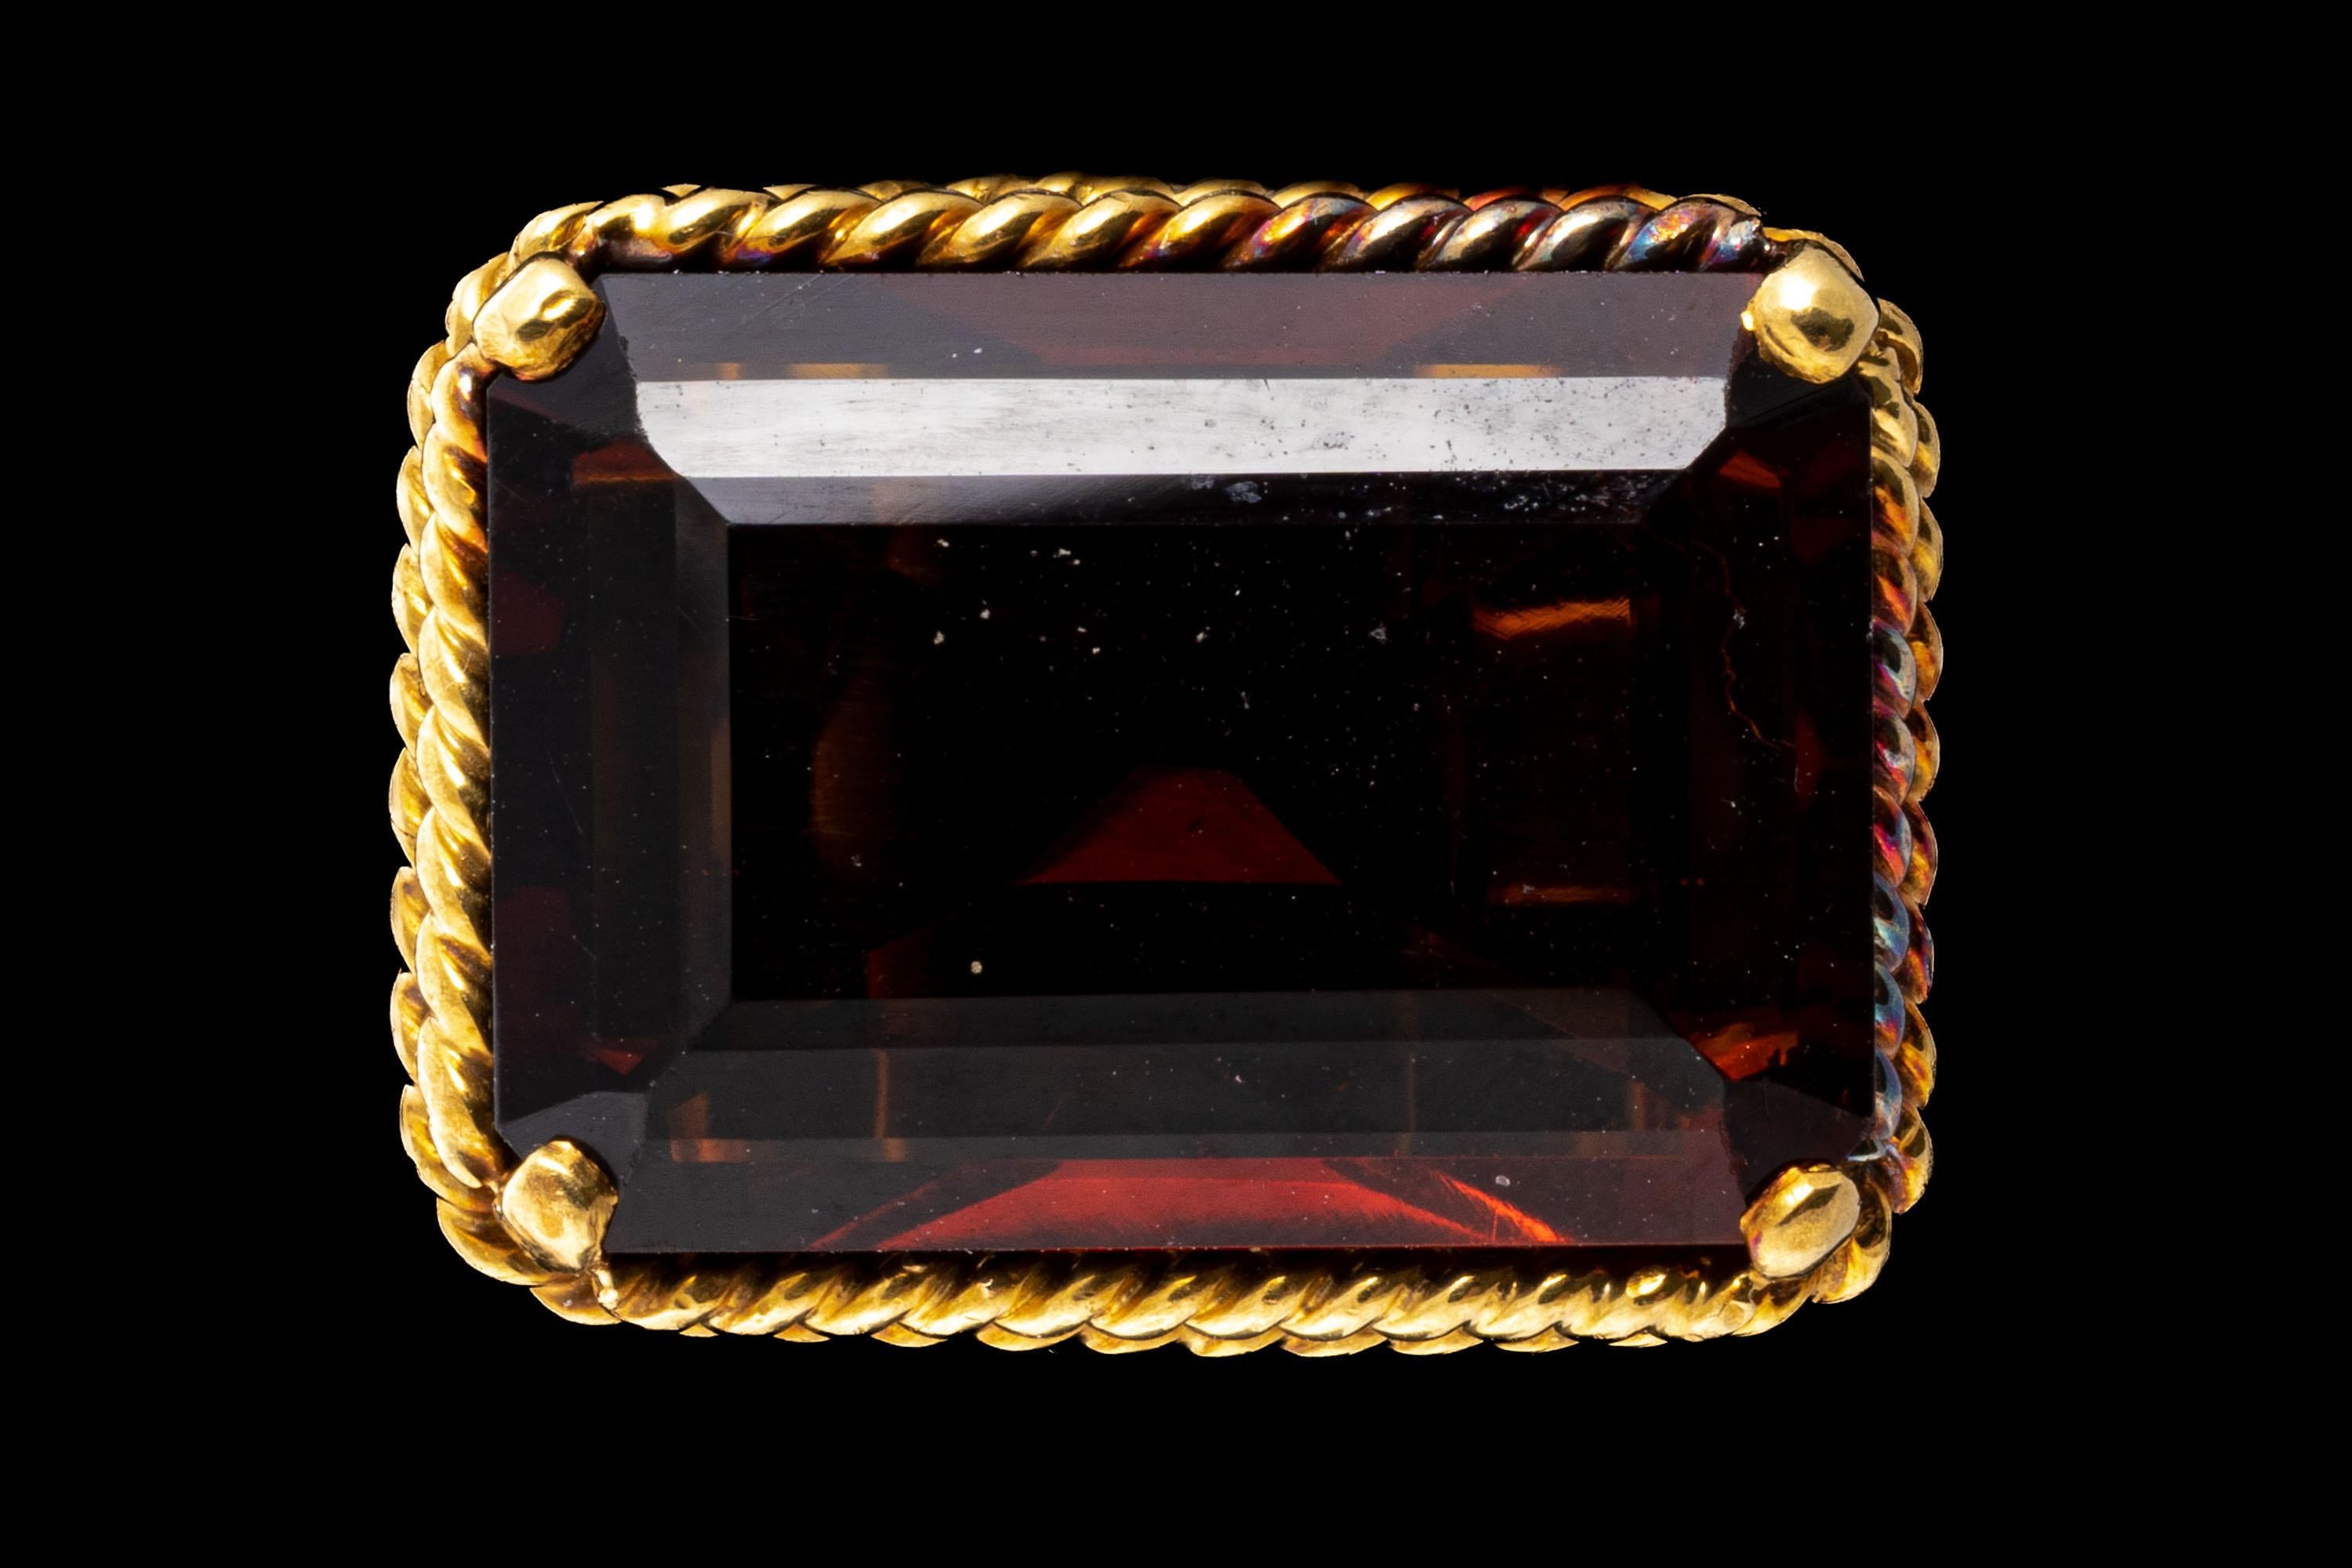 12k yellow gold ring. This striking ring is a horizontal profile, emerald cut, dark orange color citrine, approximately 9.43 CTS, prong set in a twisted wire setting, with split twisted wire shoulders and shank.
Marks: None, tests 12k
Dimensions: